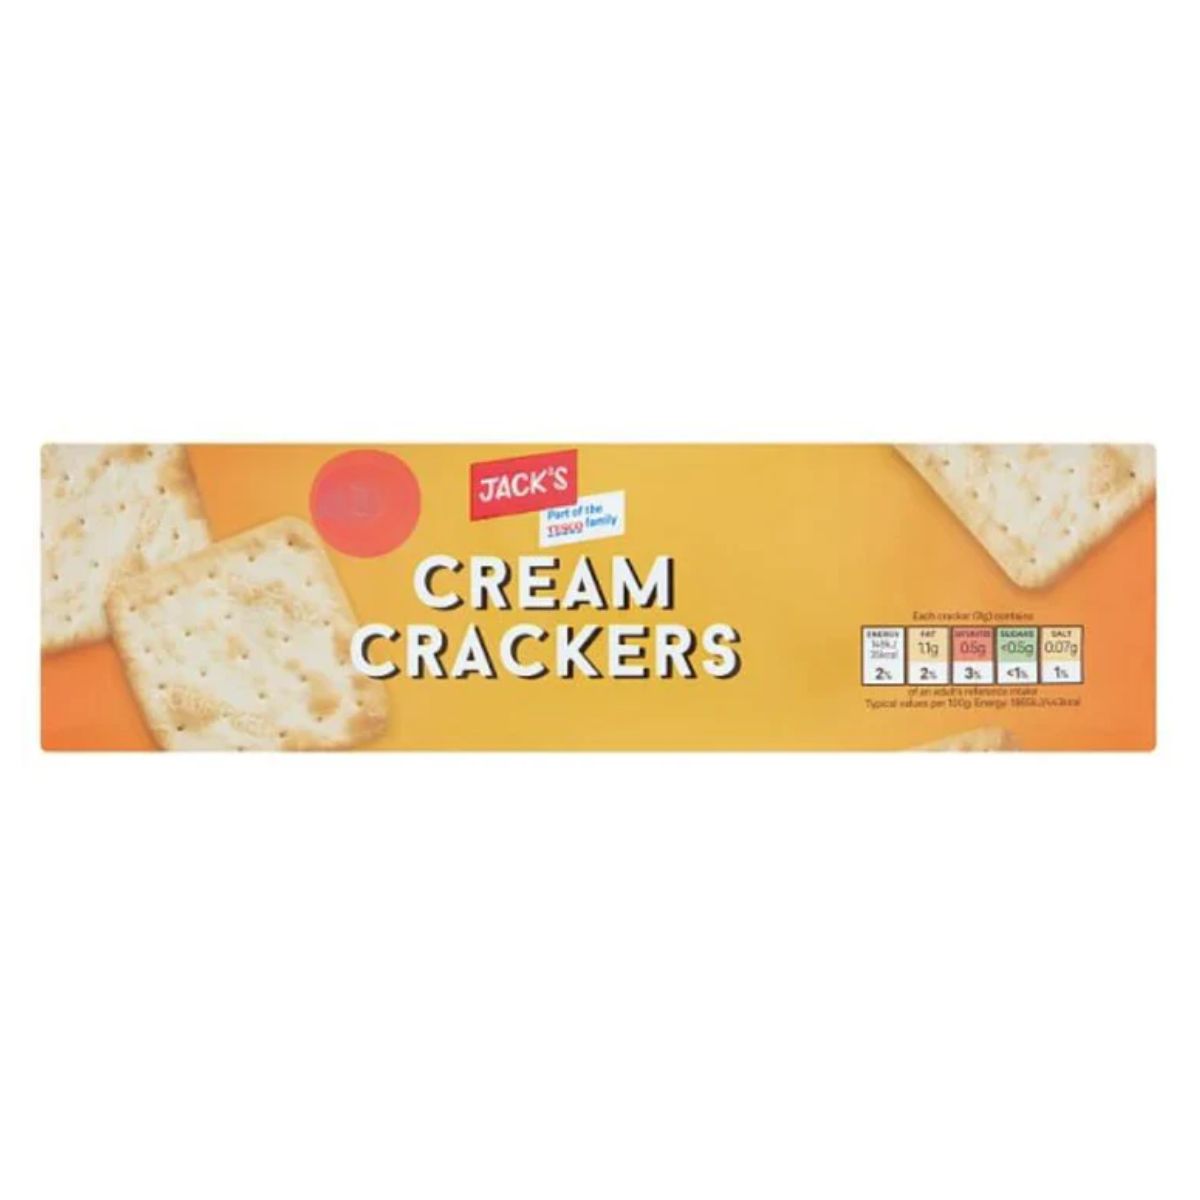 A package of Jacks - Cream Crackers - 300g featuring the logo and images of the square crackers on an orange background.